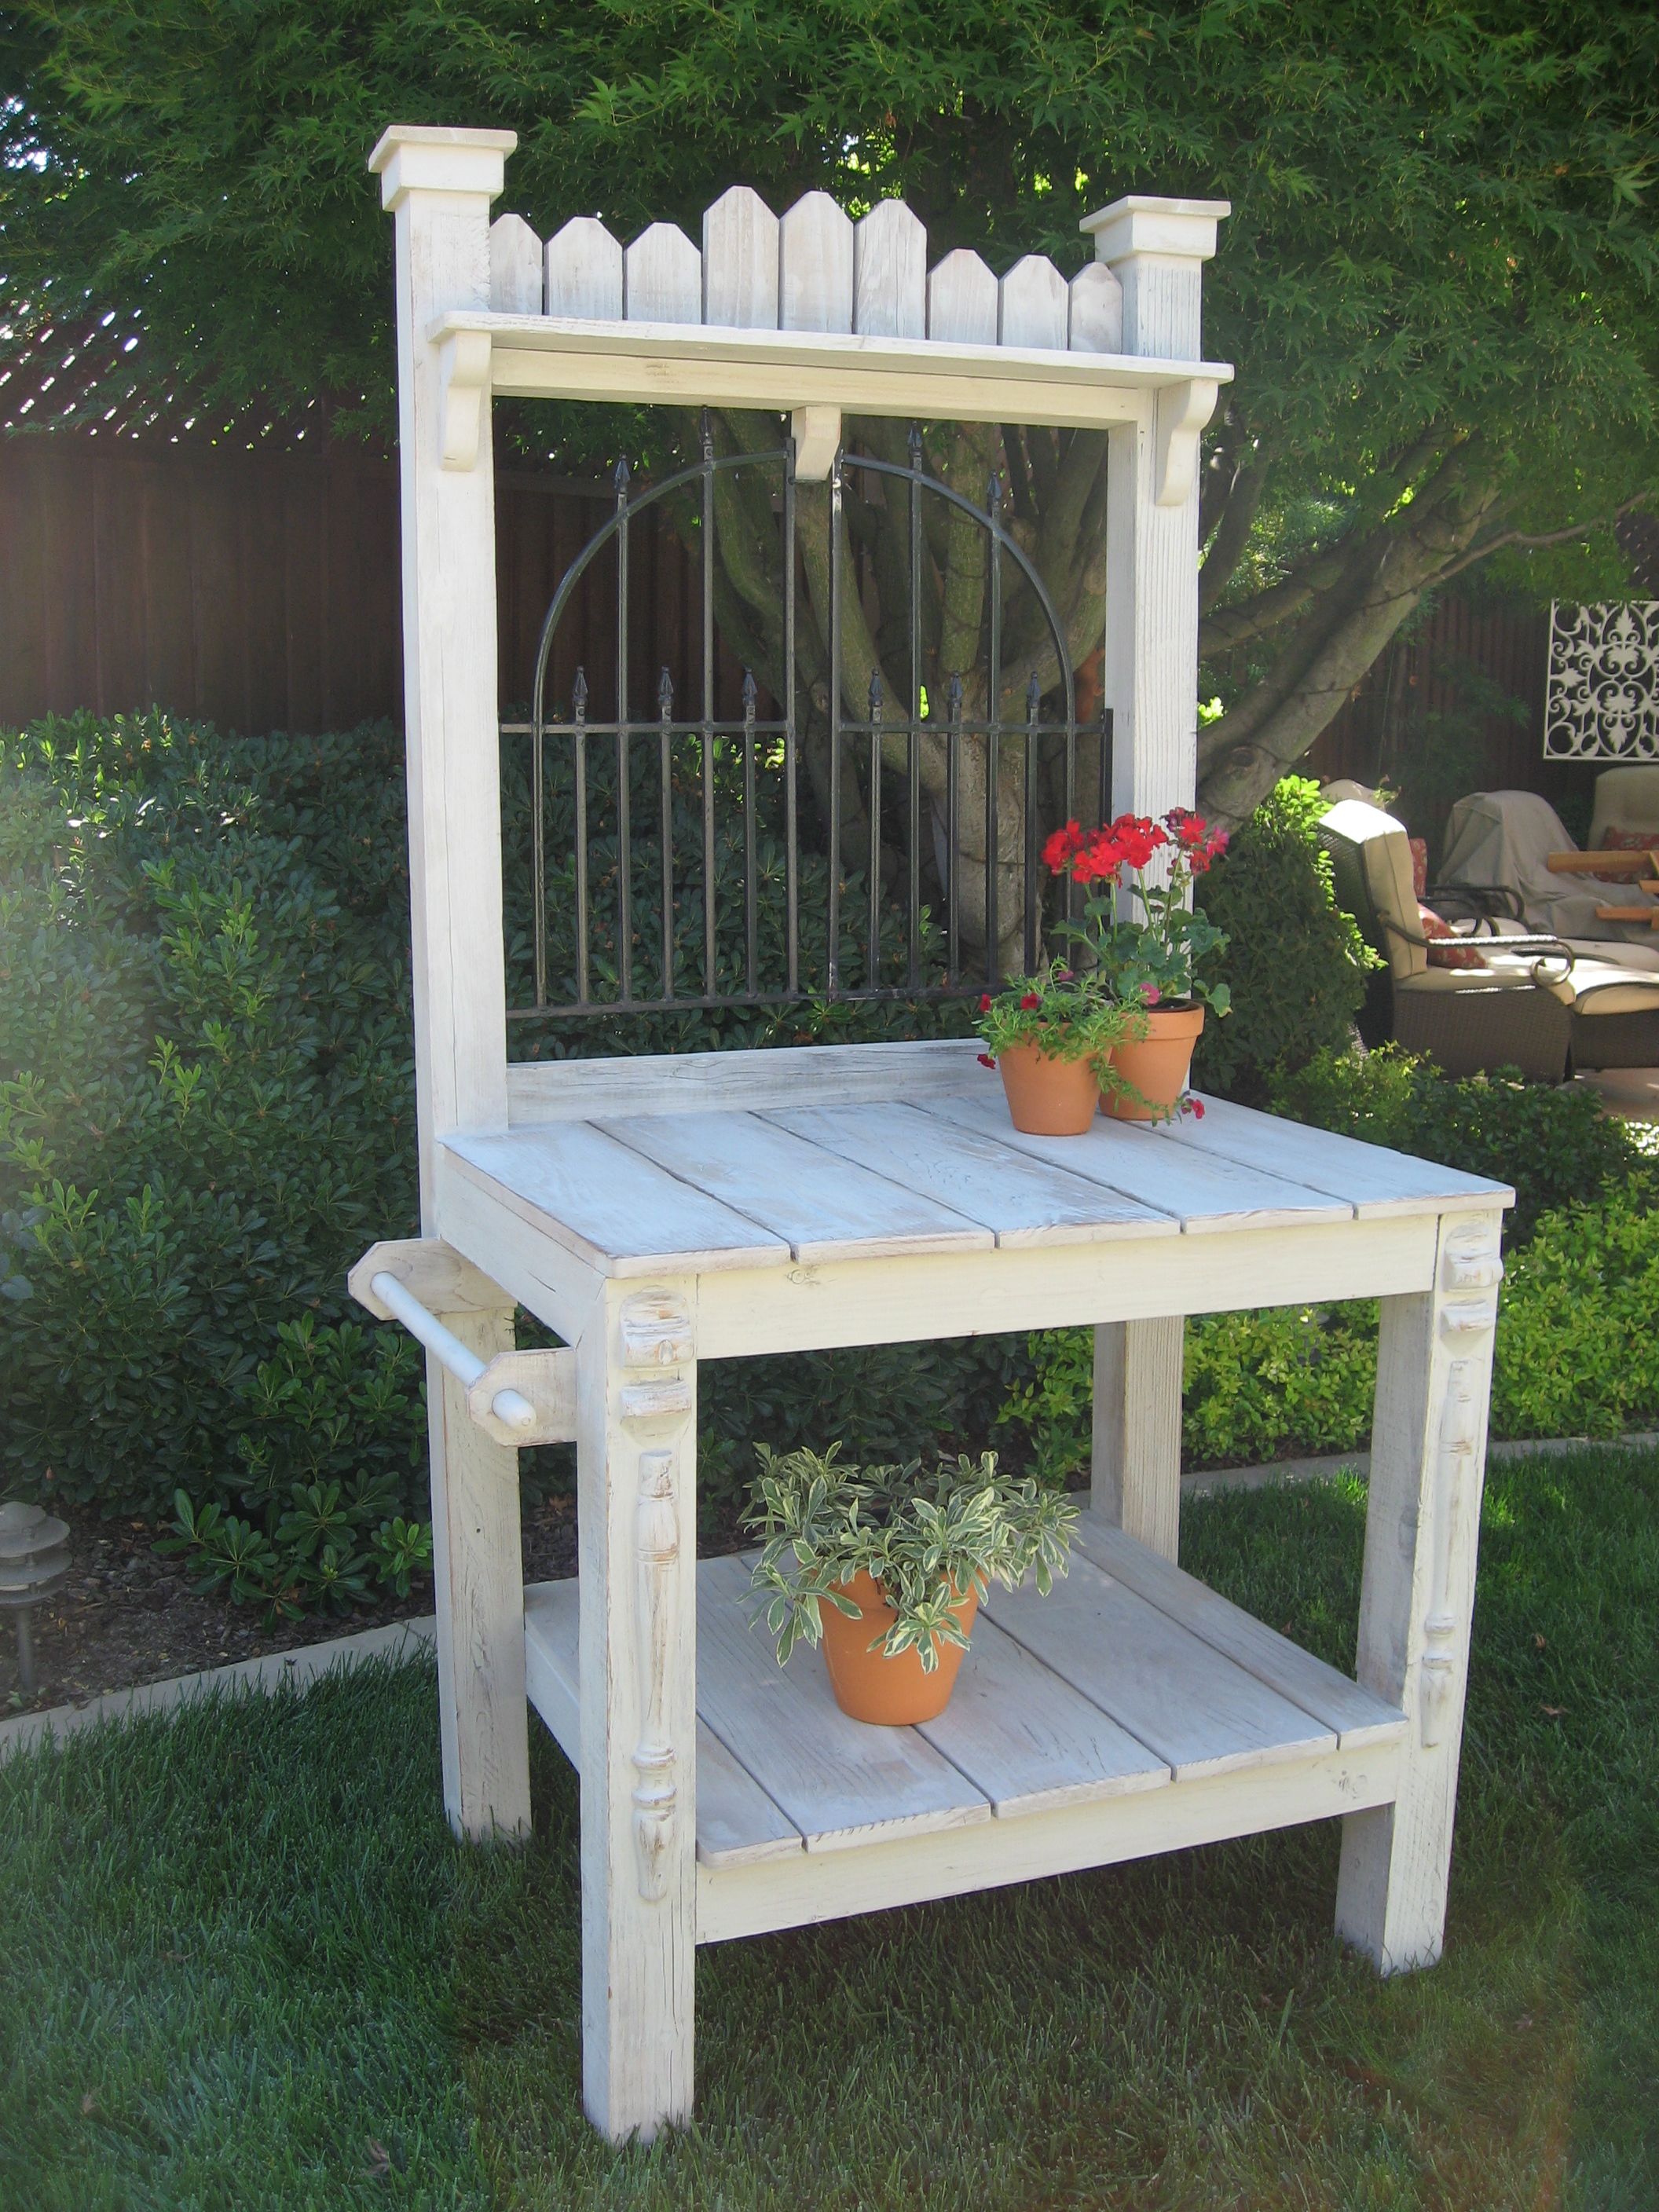 Washed Potting Bench with Iron Gate